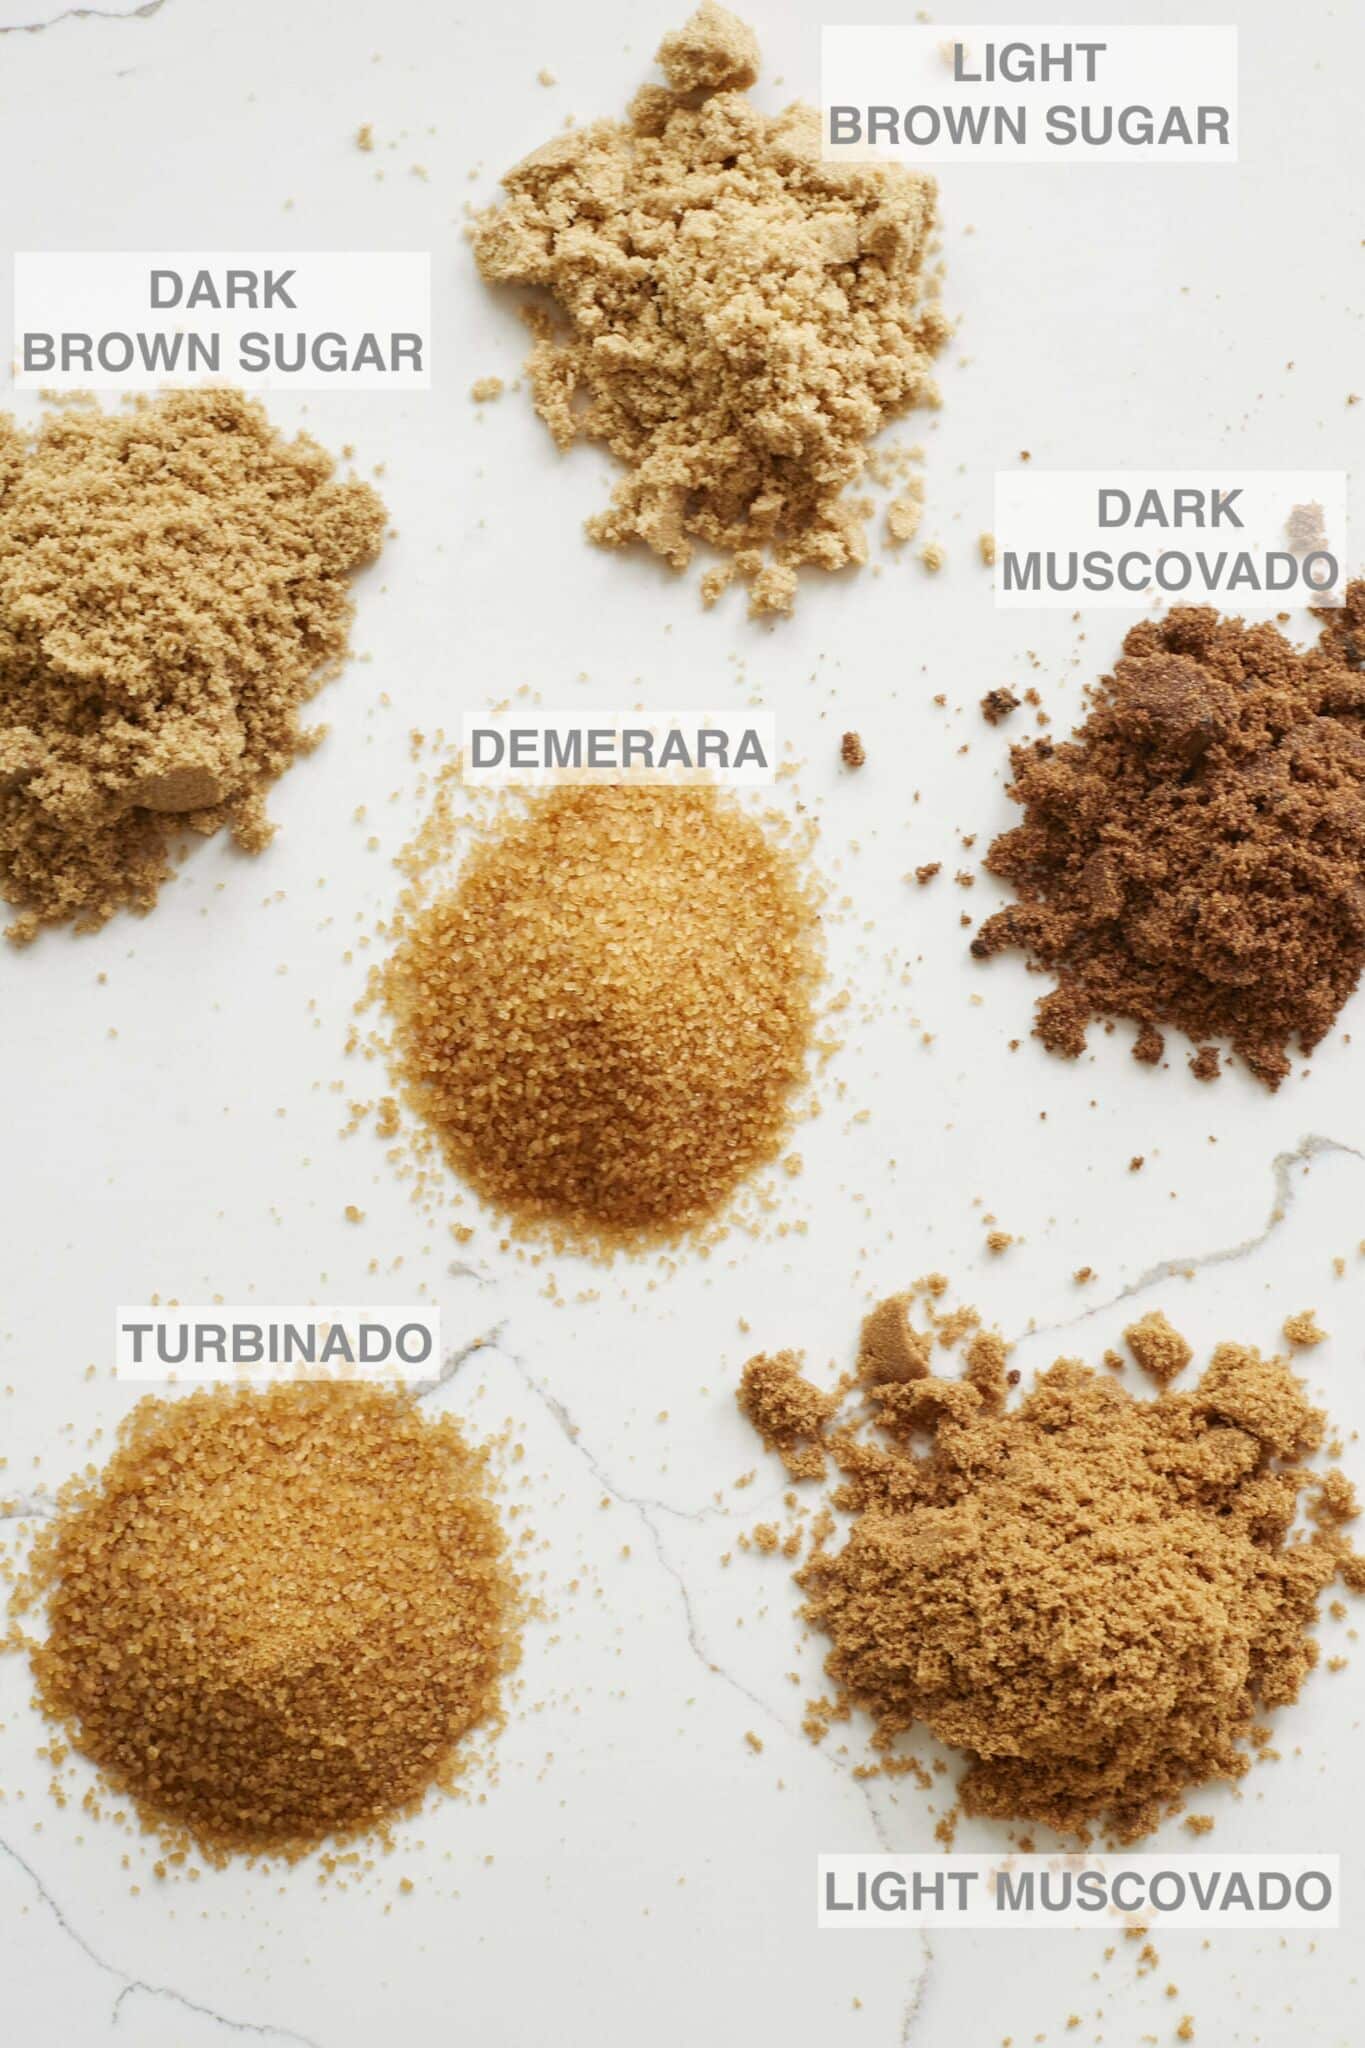 Different Types of Brown Sugars include Light Brown Sugar, Dark Brown Sugar, Dark Muscovado, Light Muscovado, Demerara, and Turbinado. 